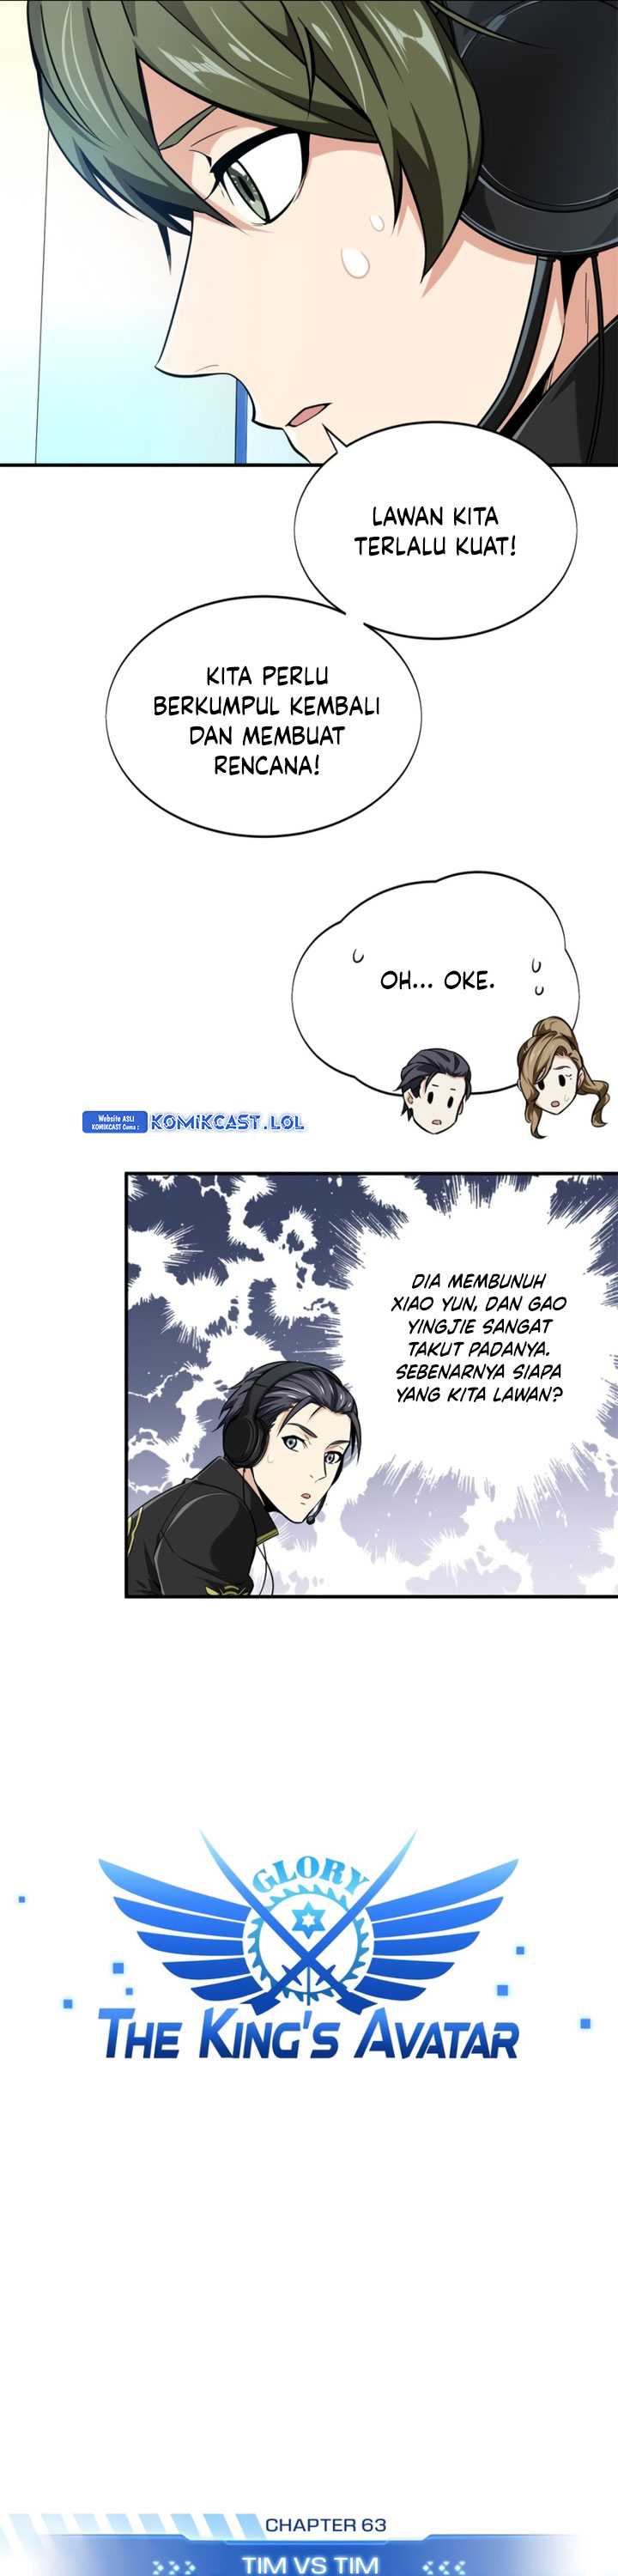 The King’s Avatar (2020) Chapter 63